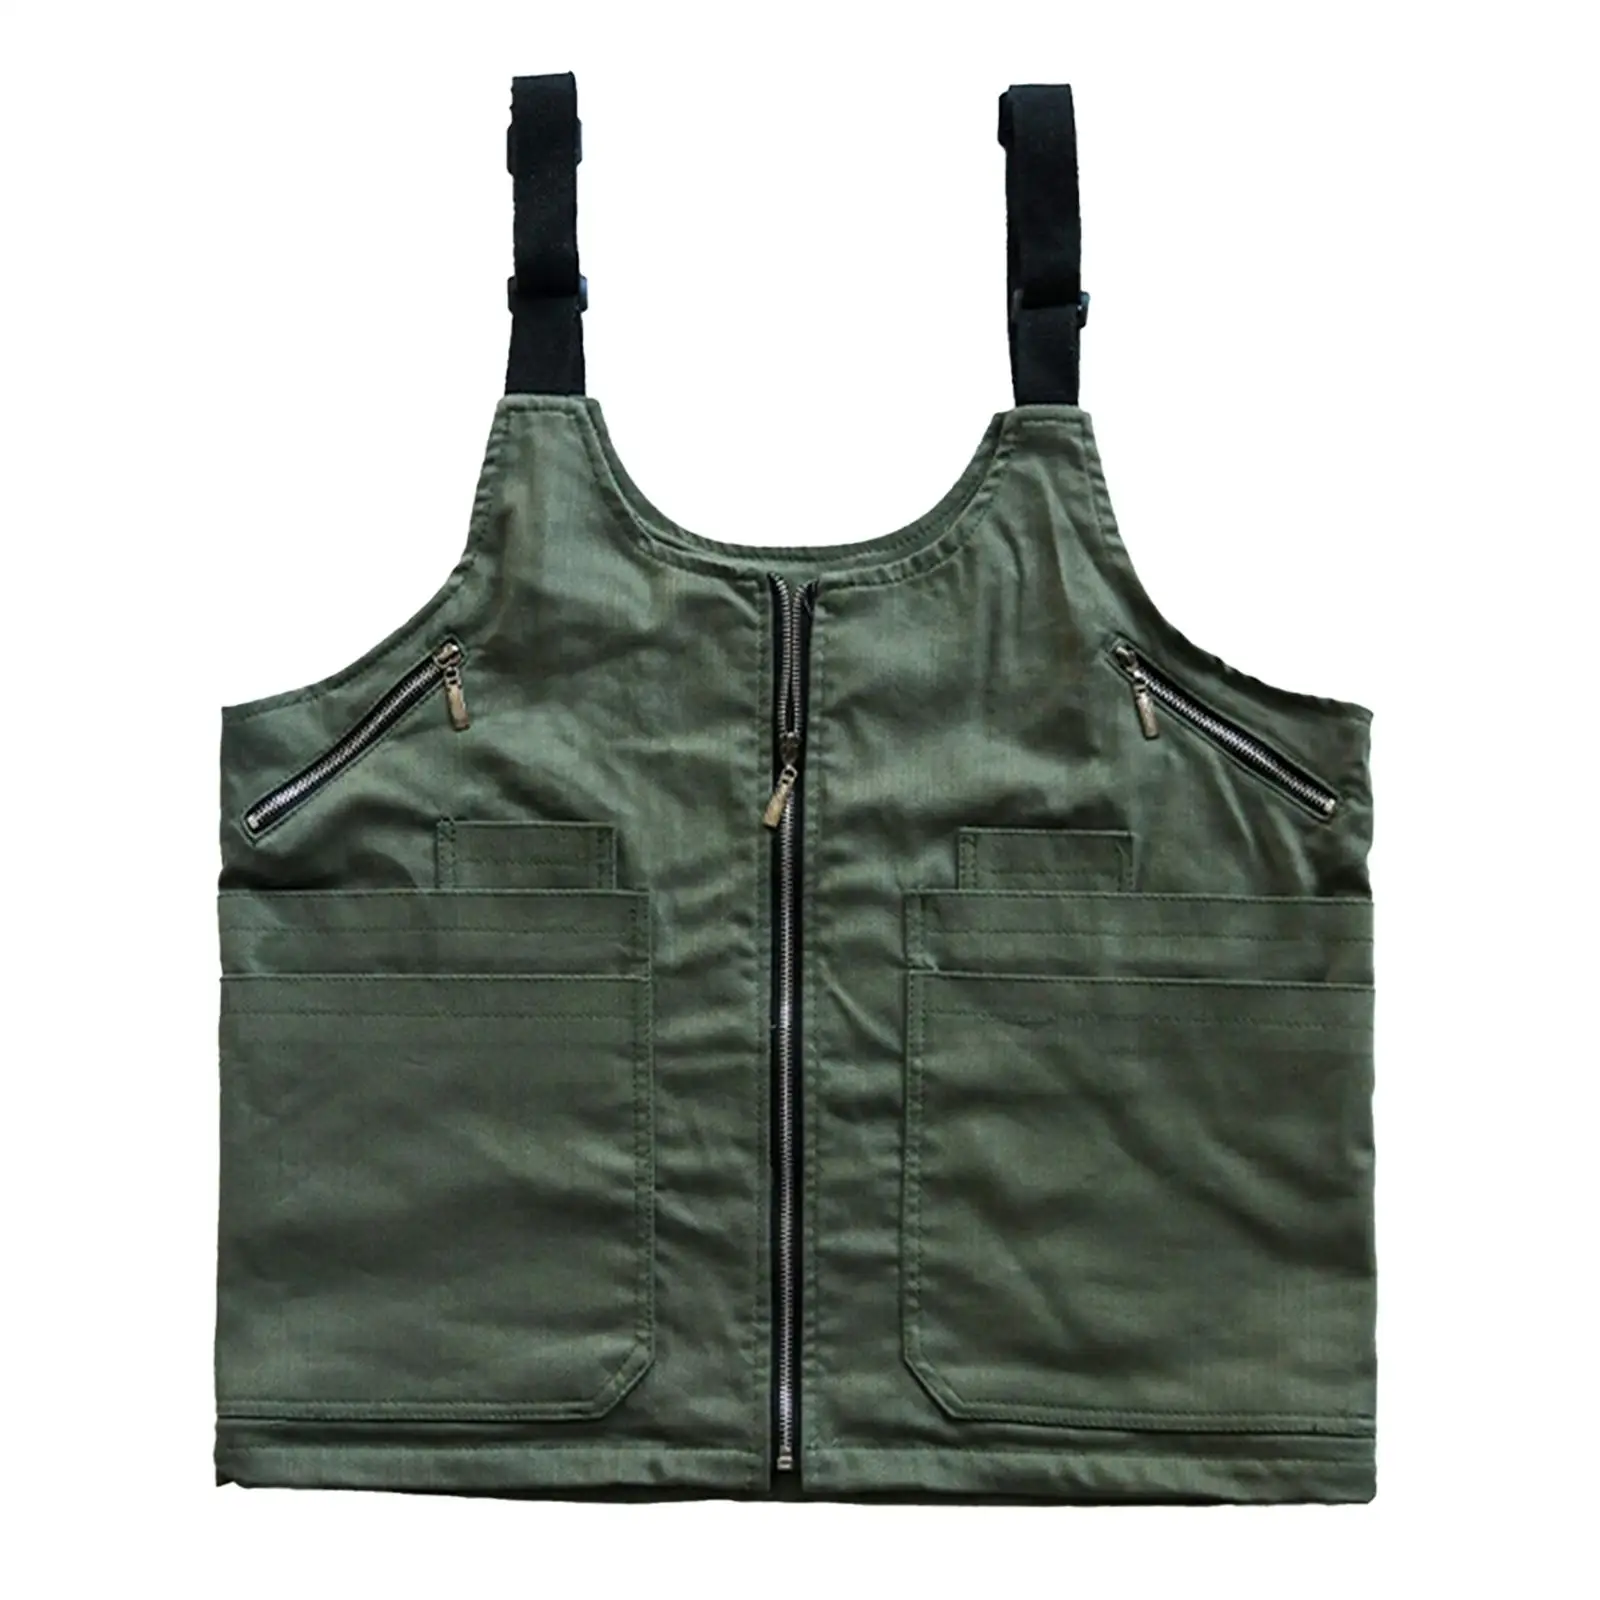 Camping Vest with Tool Pockets Barbecue Apron for Backpacking Fishing Yard